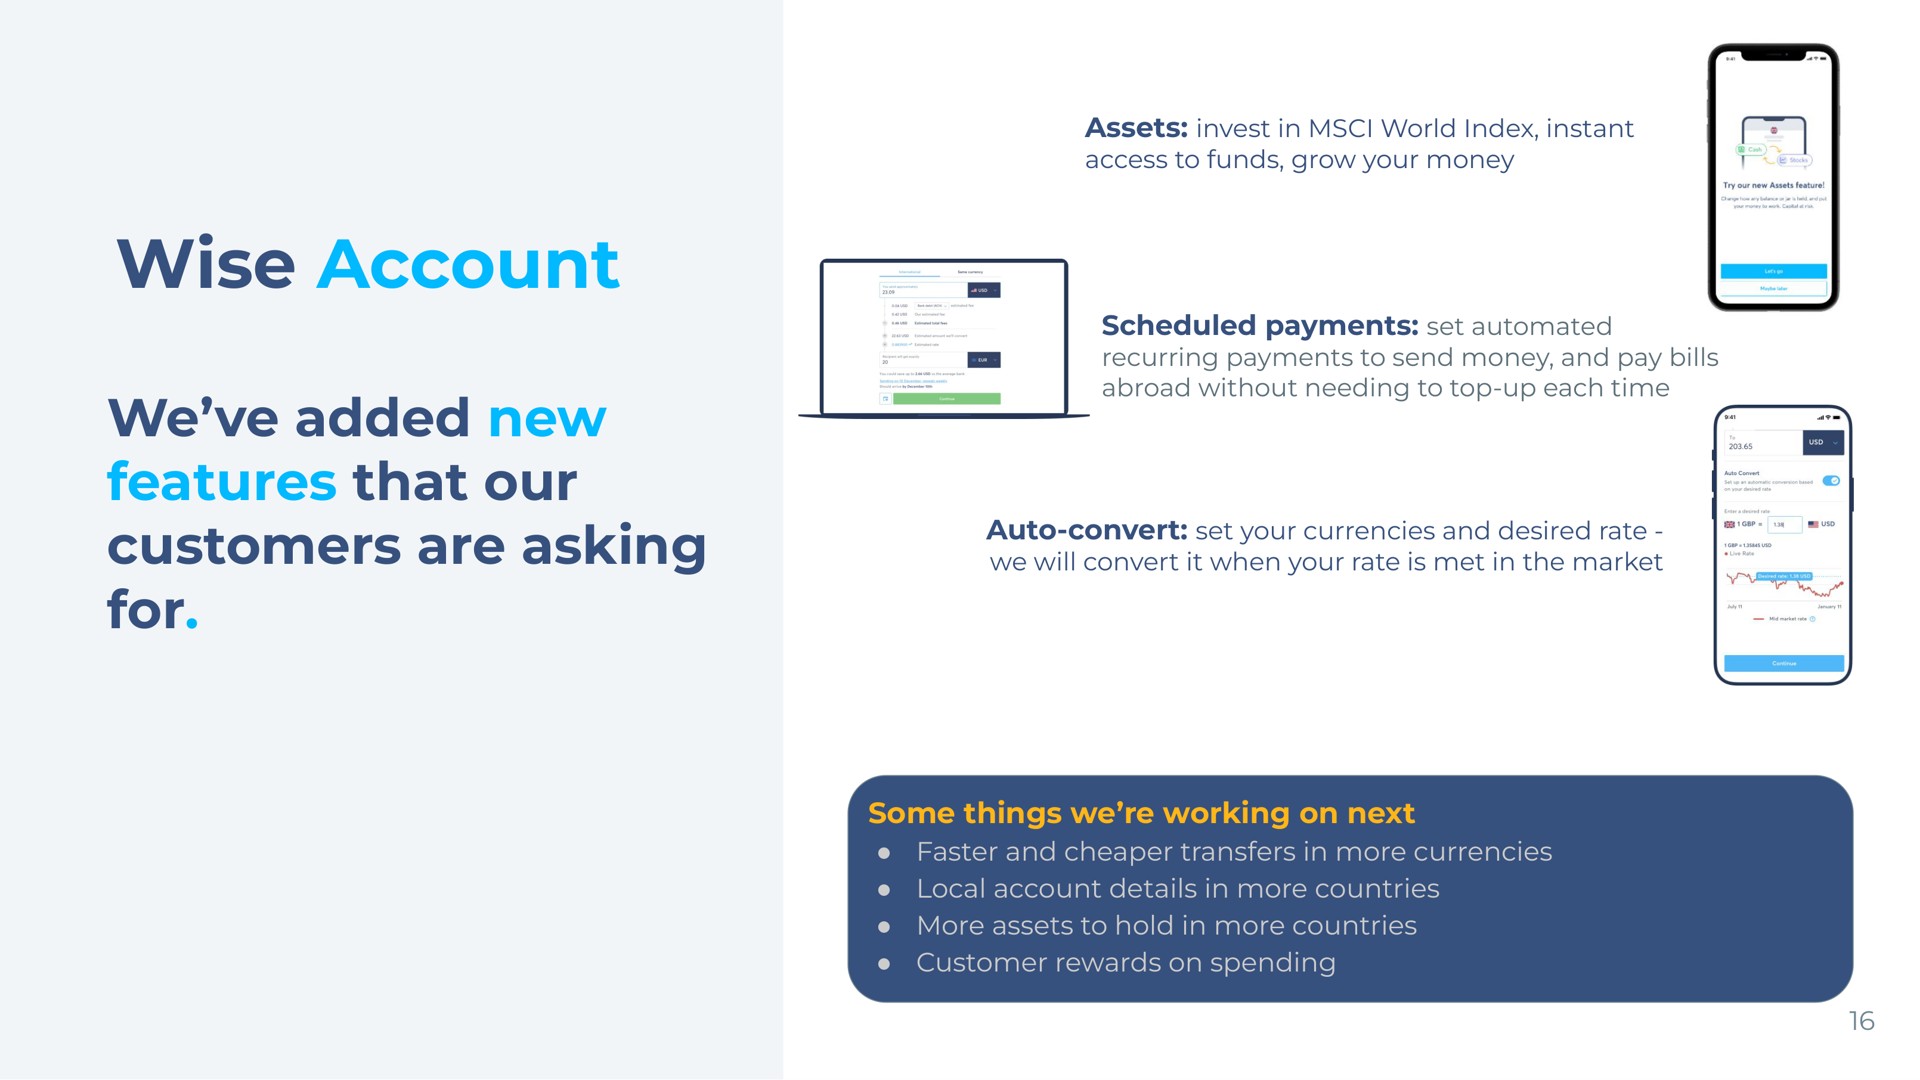 wise account we added new features that our customers are asking for scheduled payments set some things we working on next faster and transfers in more currencies local account details in more countries more assets to hold in more countries customer rewards on spending | Wise